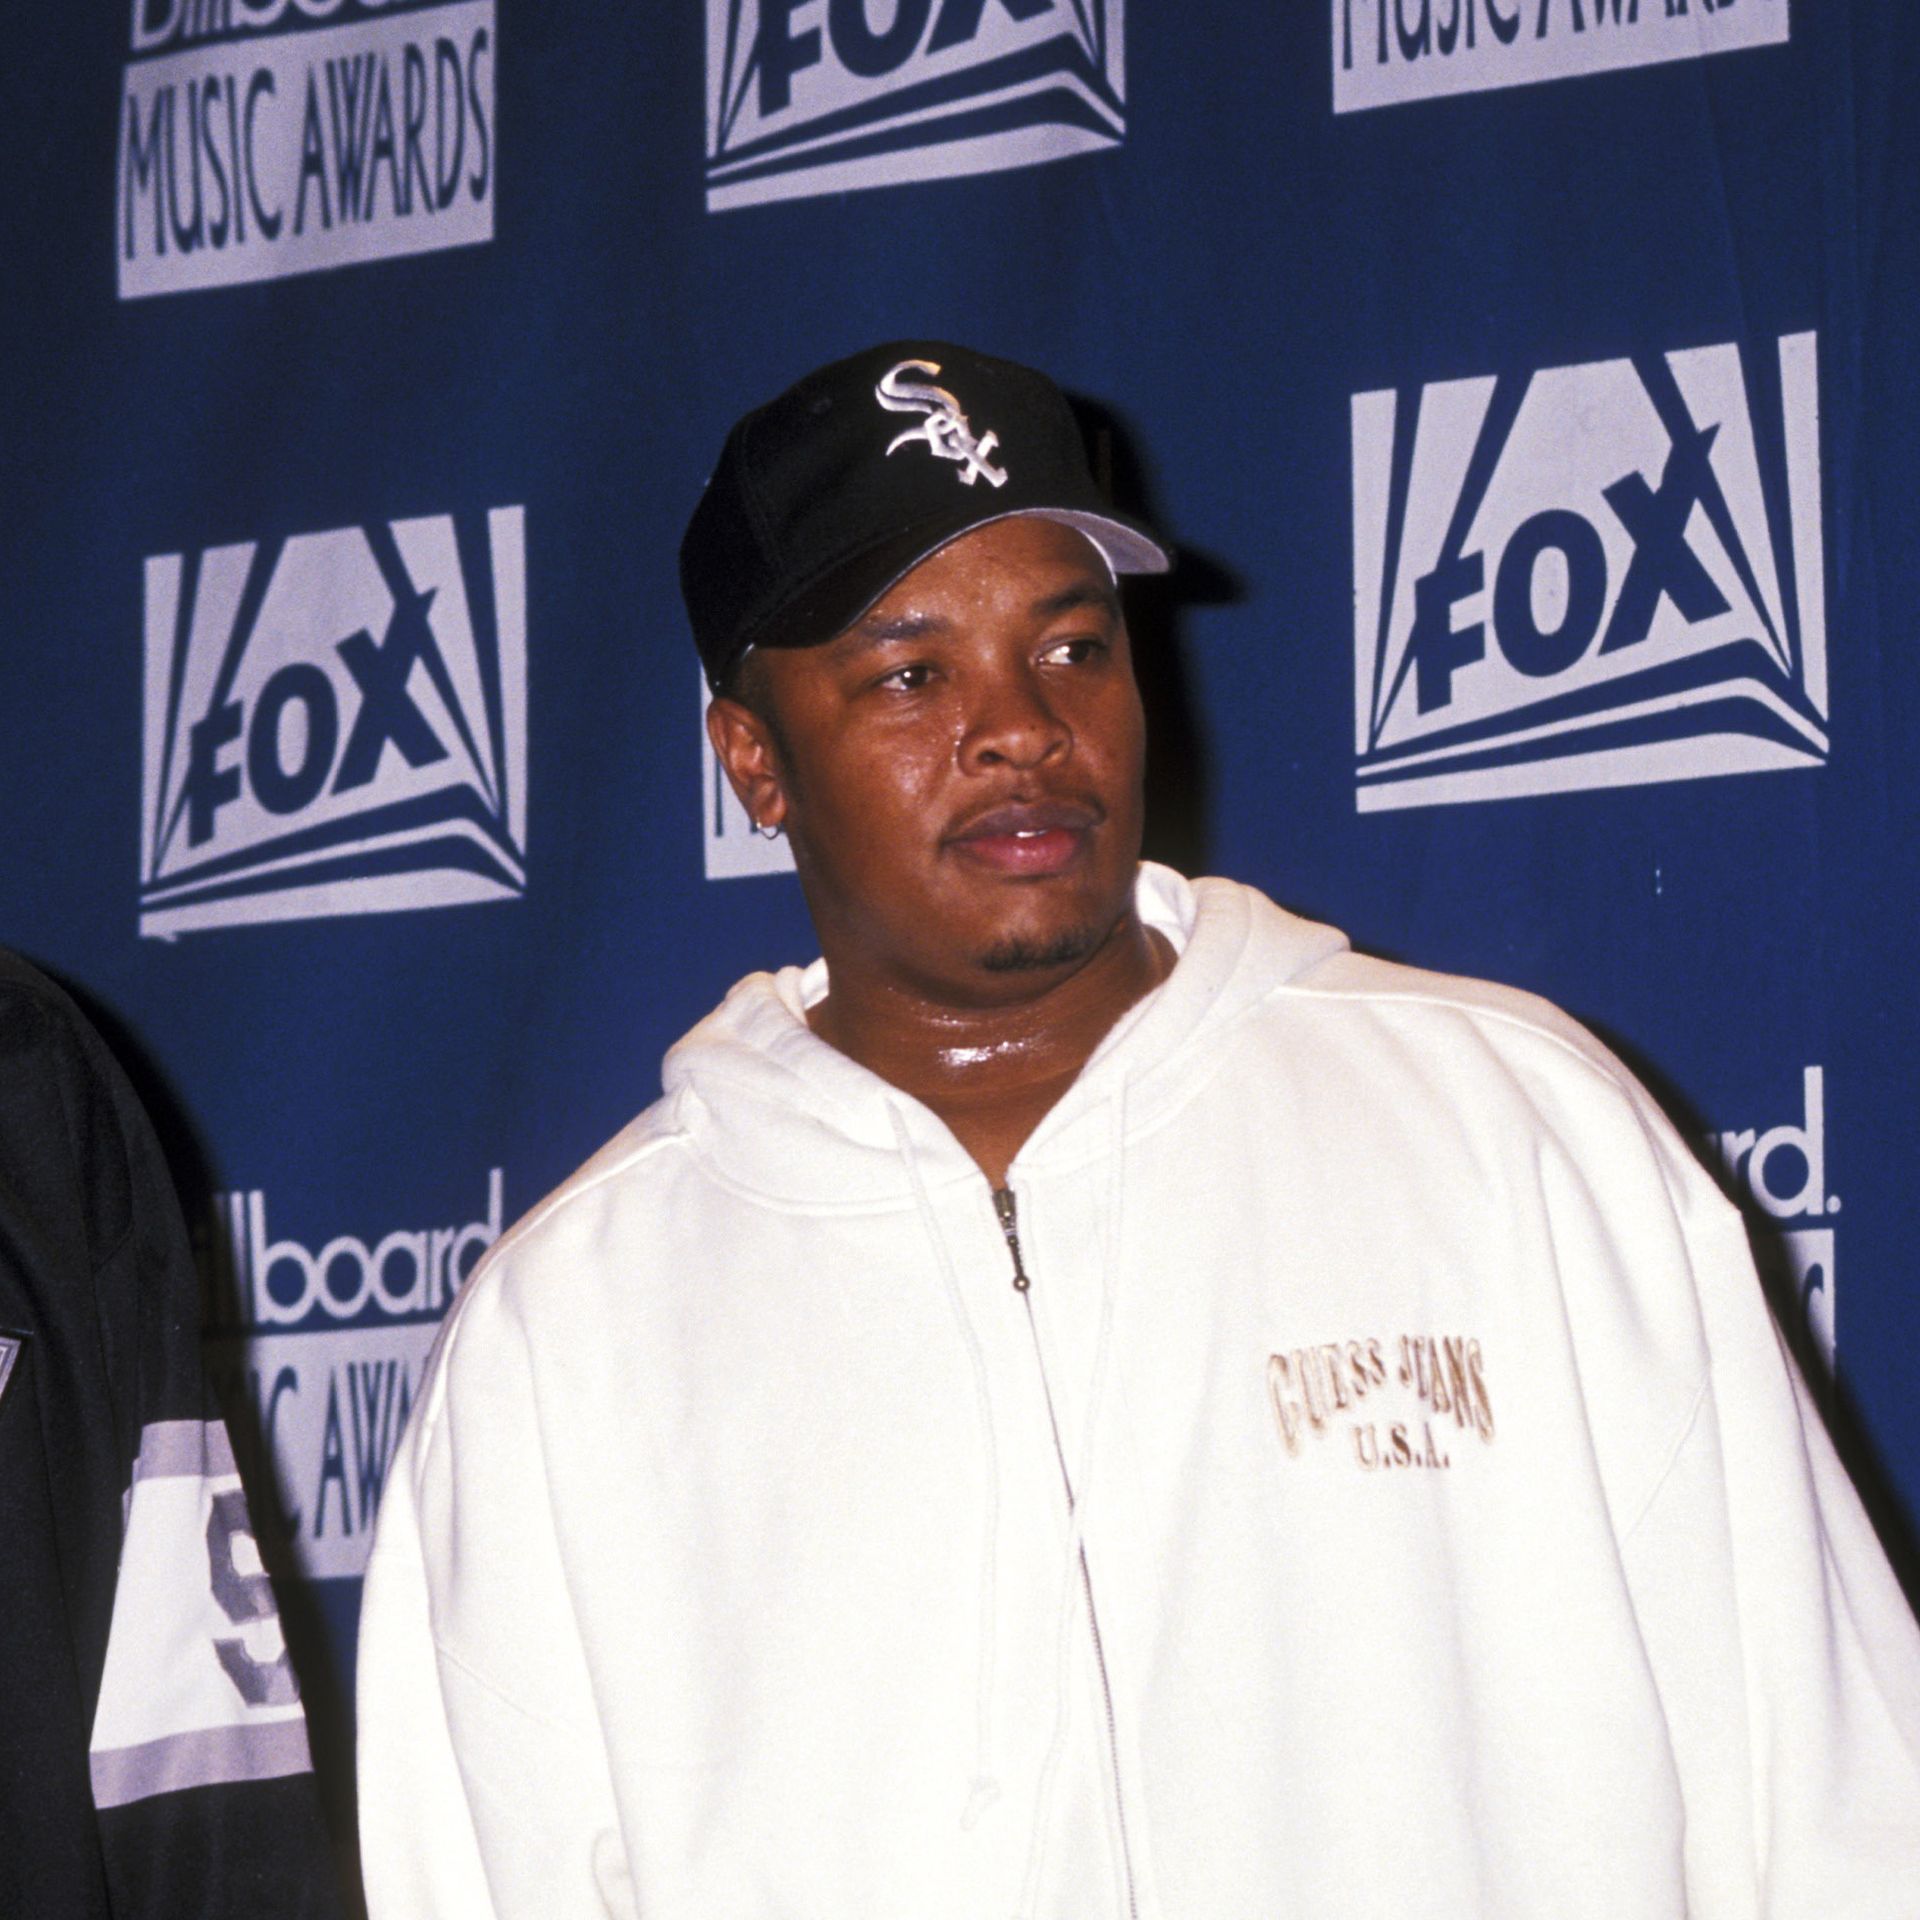 New documentary looks back on White Sox rebrand and hip-hop